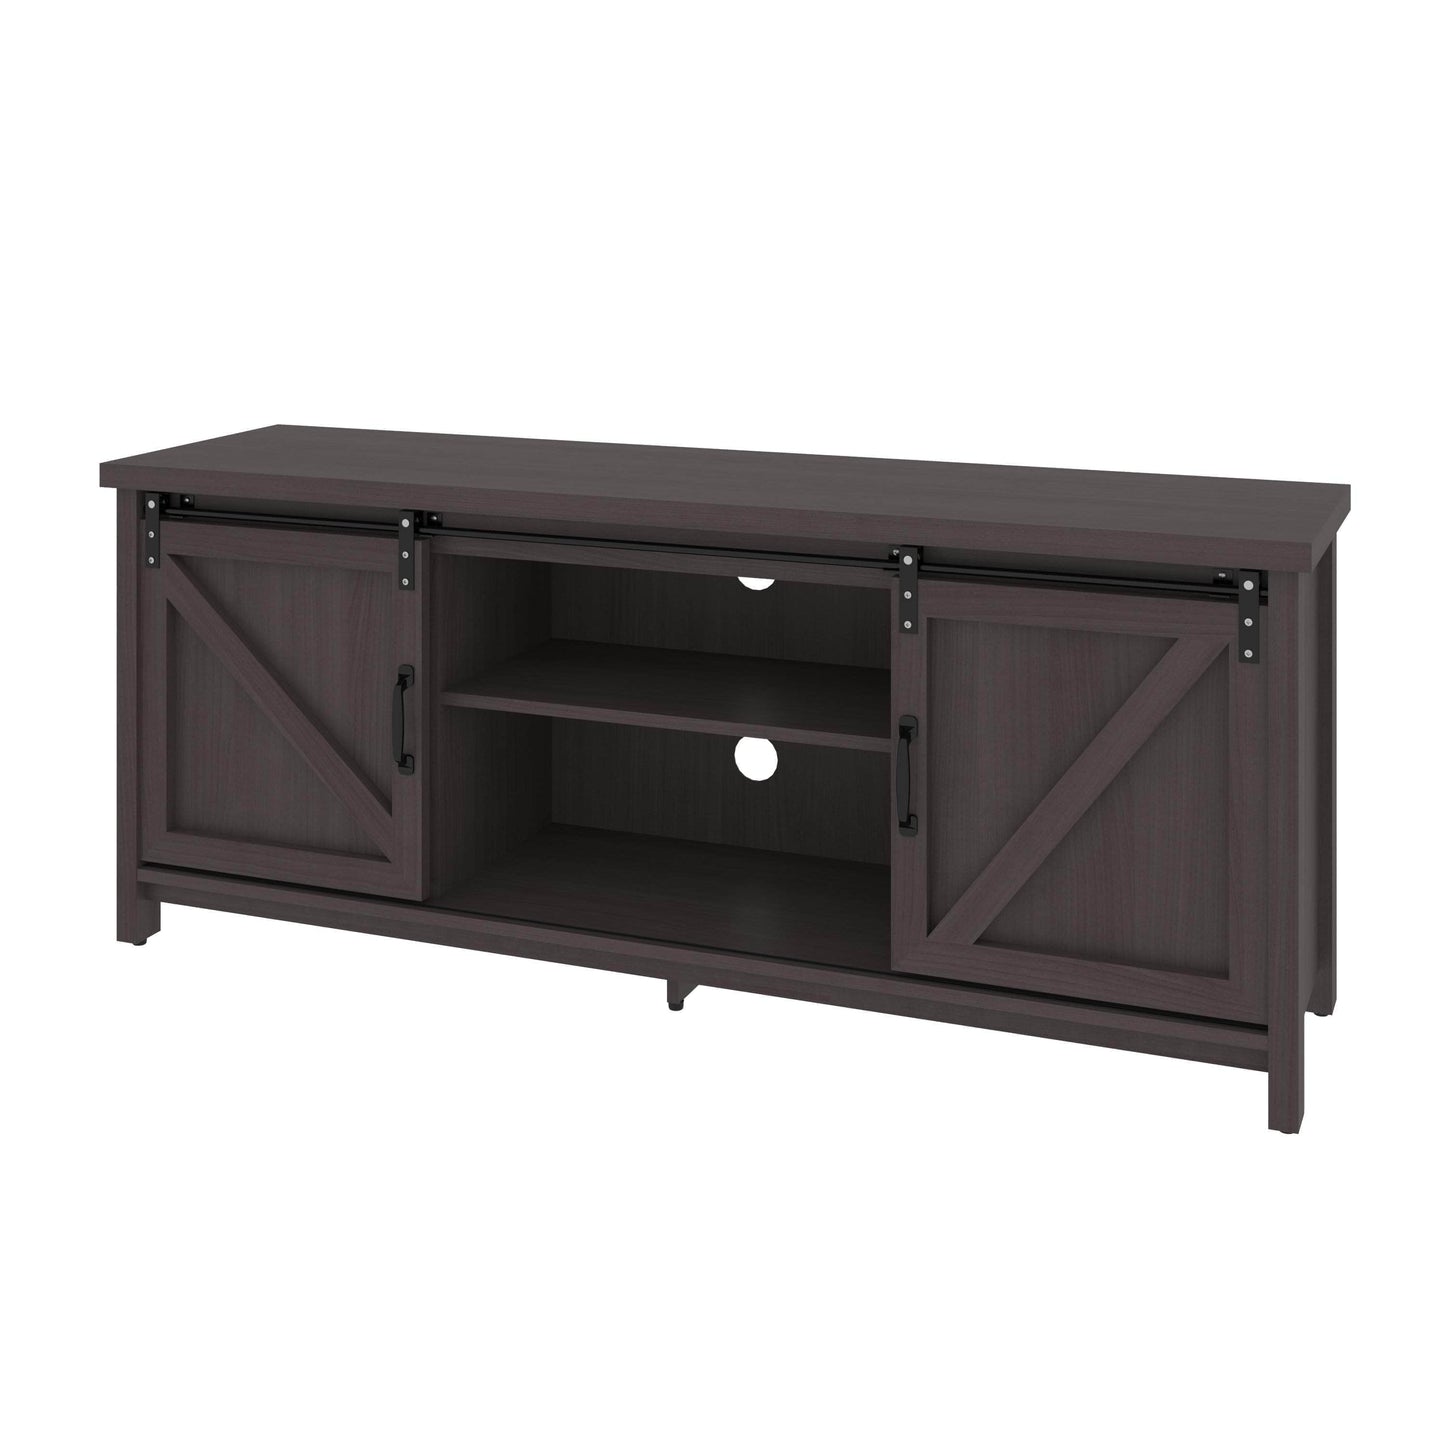 Modubox TV Stand Storm Grey Isida 58"W TV Stand - Available in 2 Colours